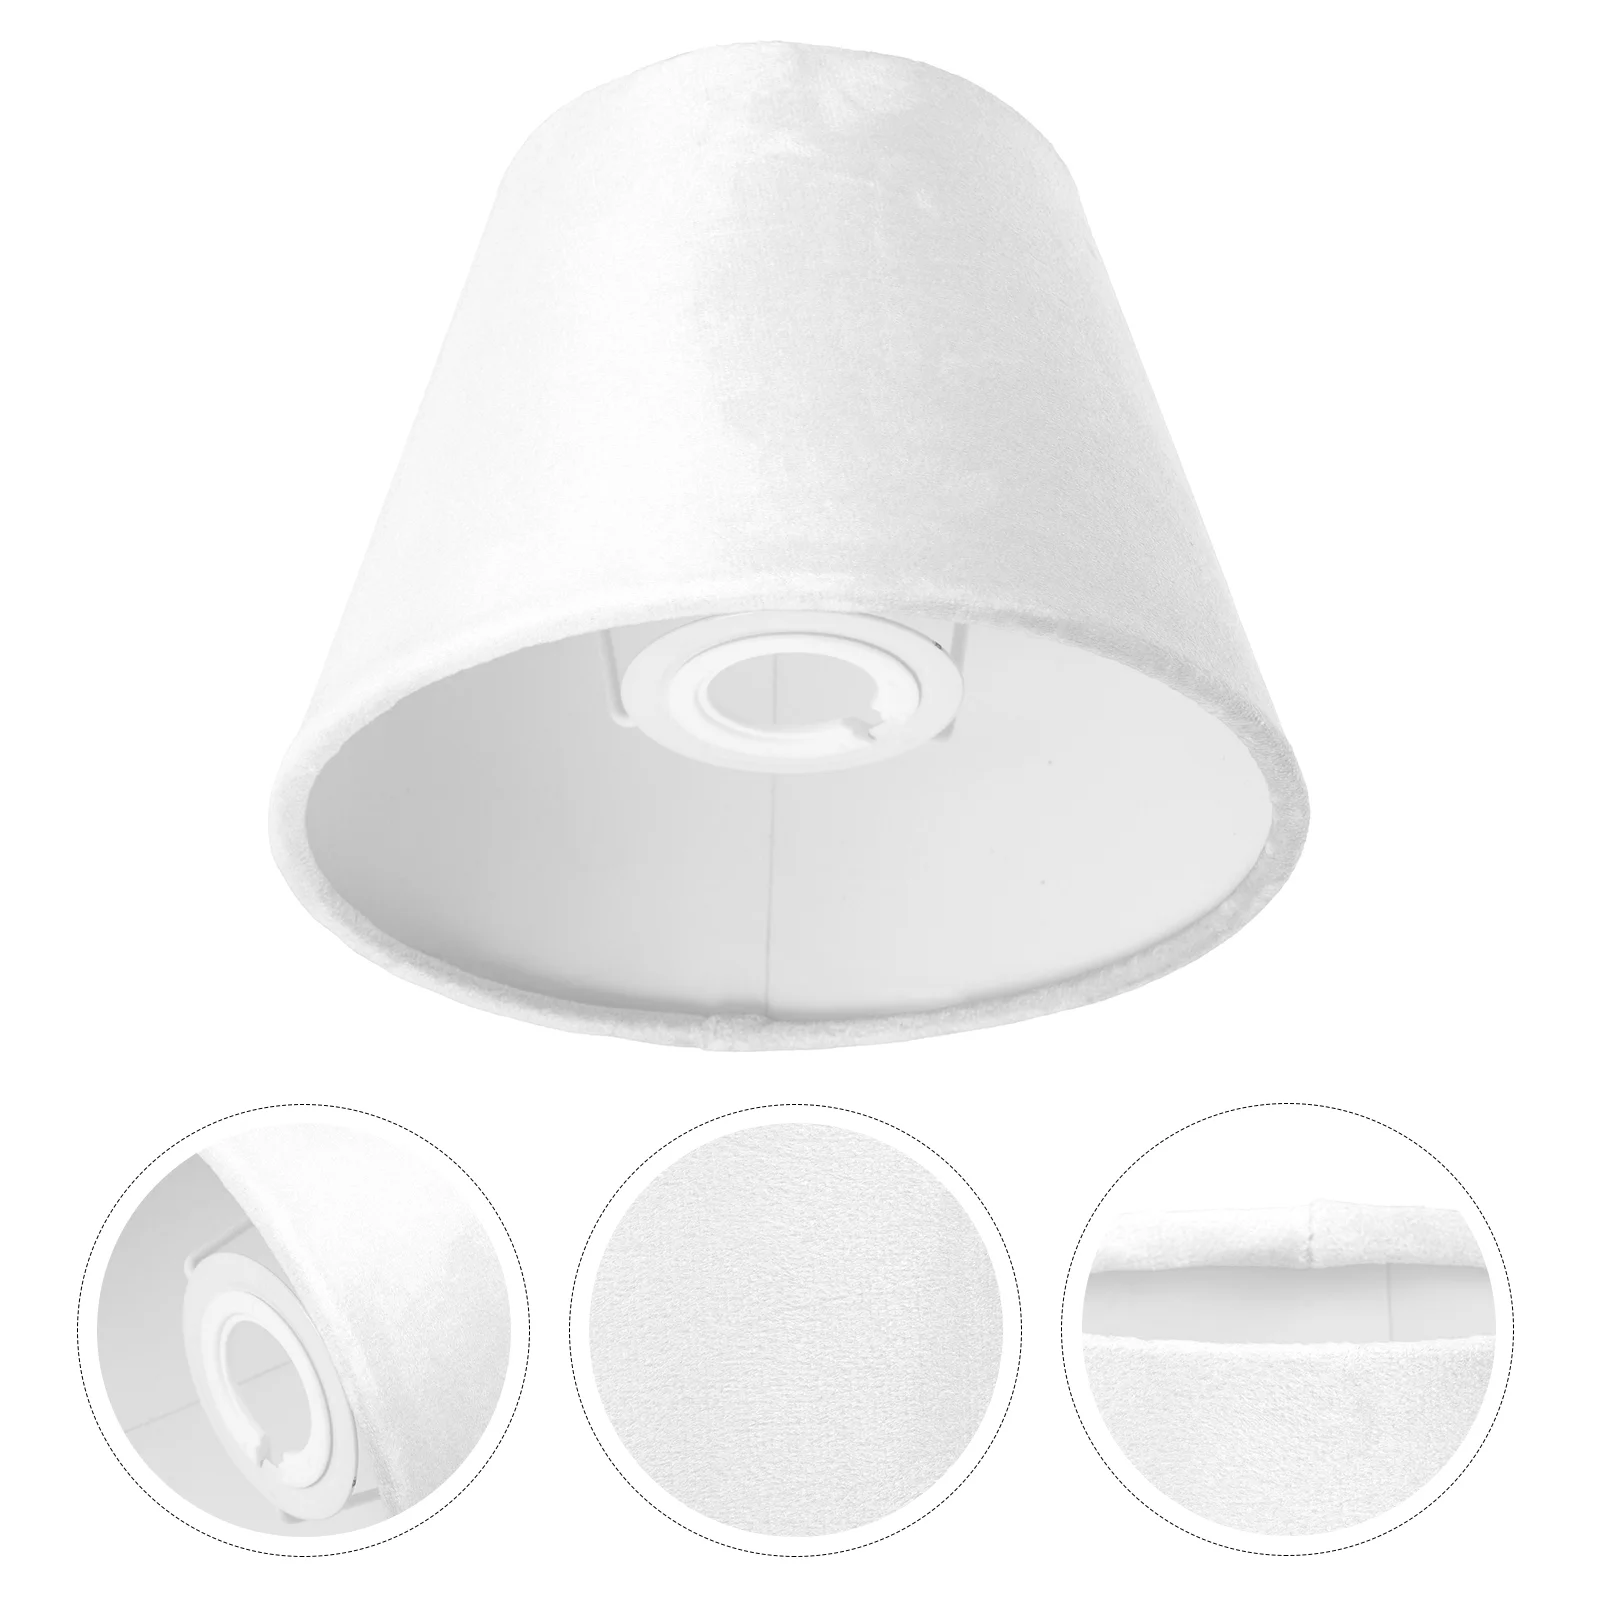 

Velvet Lampshade Decorative Light Cover Rustic Dust-proof Table Protective for Desk Delicate Cloth Office Fixtures